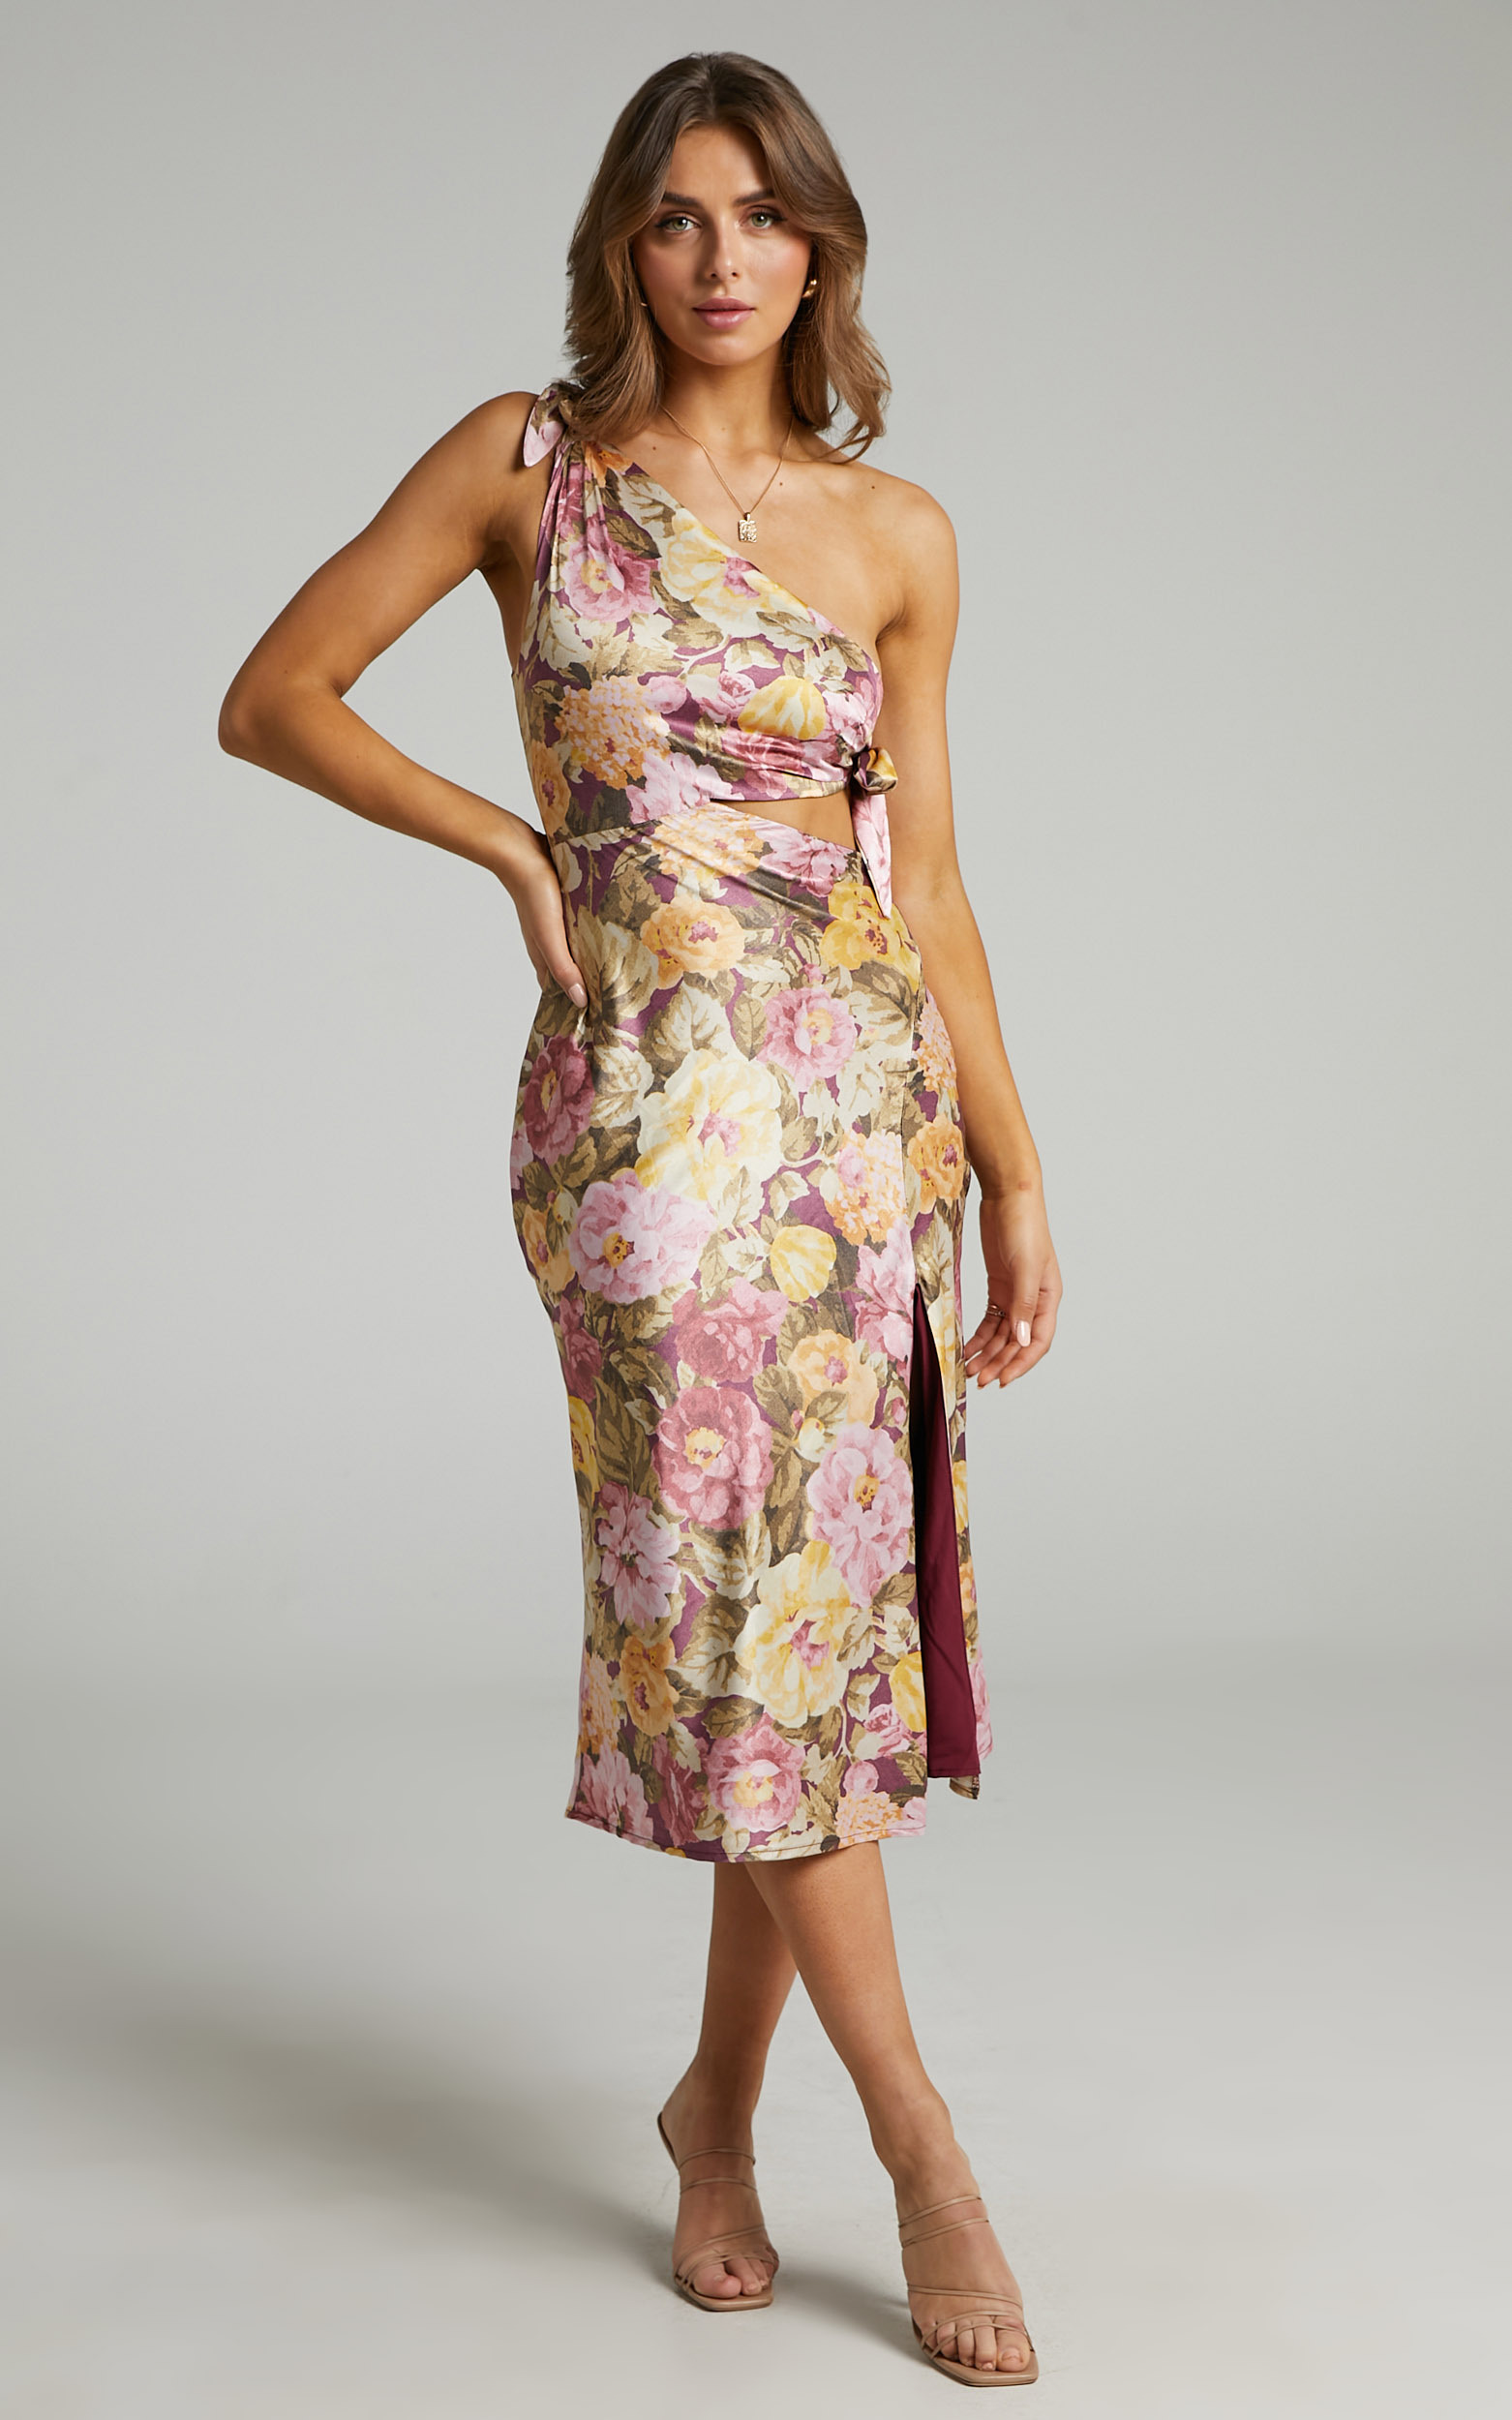 Glaucus Dress in Classic Floral - 06, PNK1, hi-res image number null